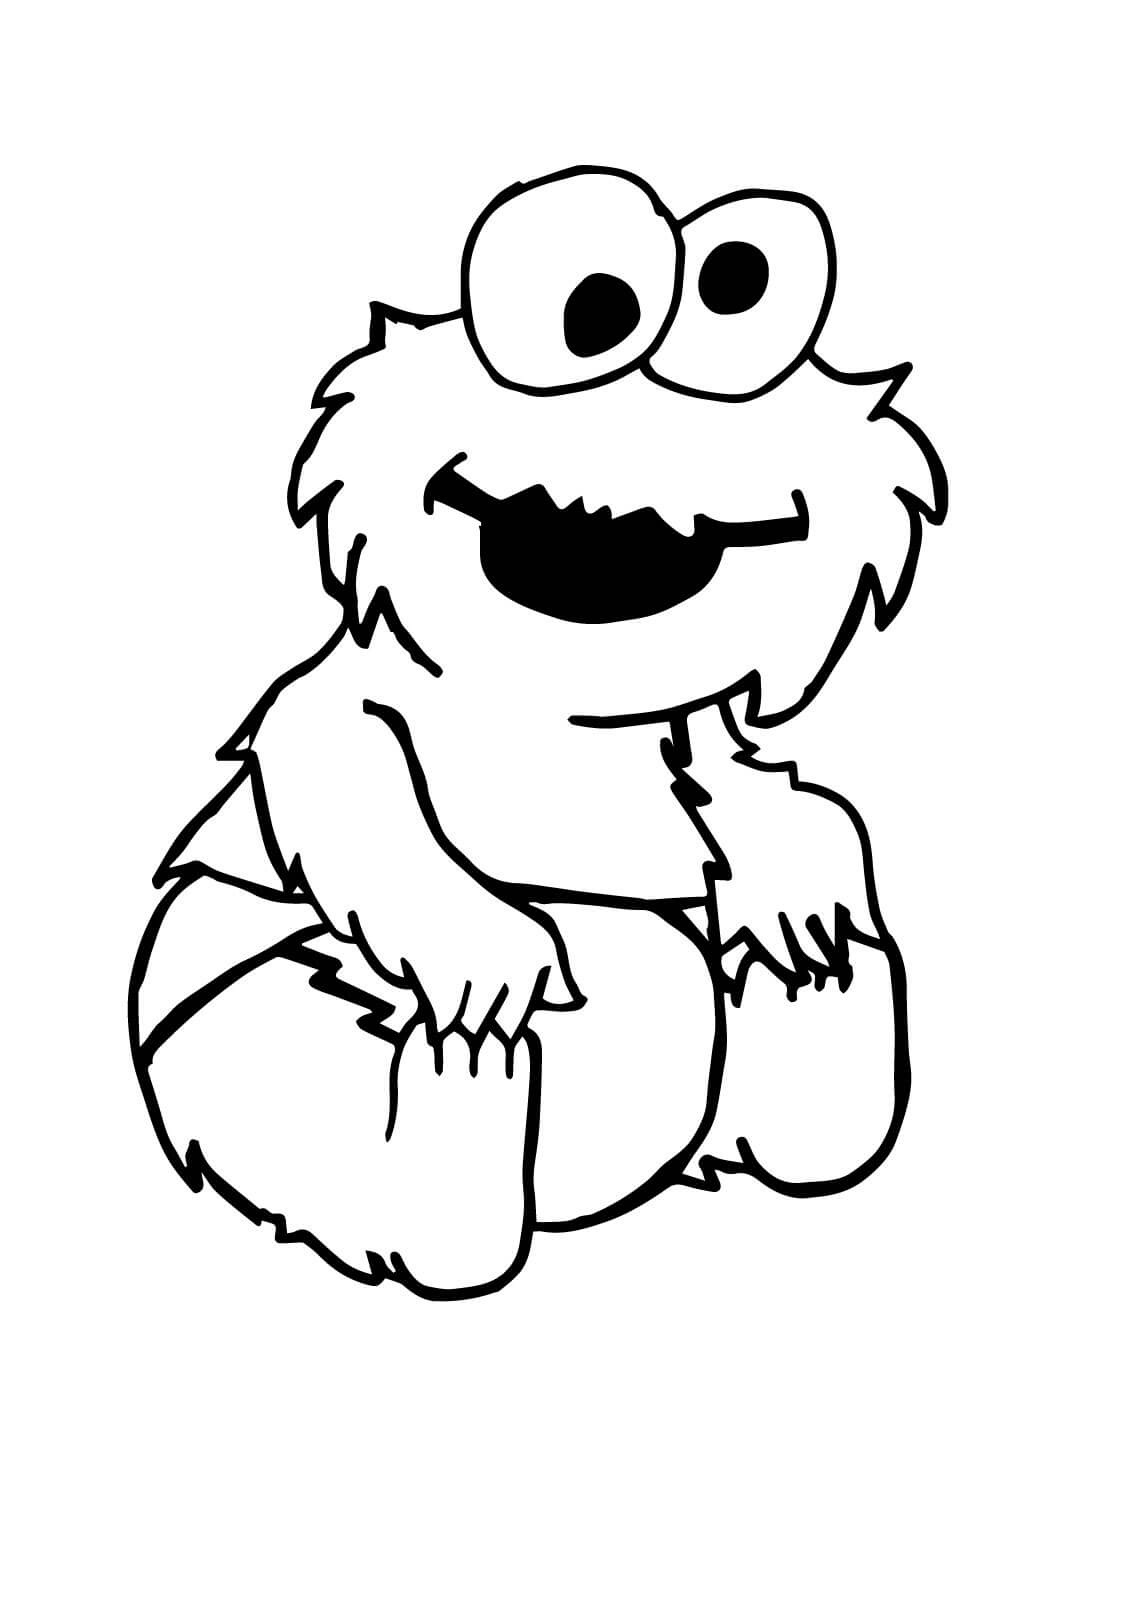 oscar the grouch coloring pages